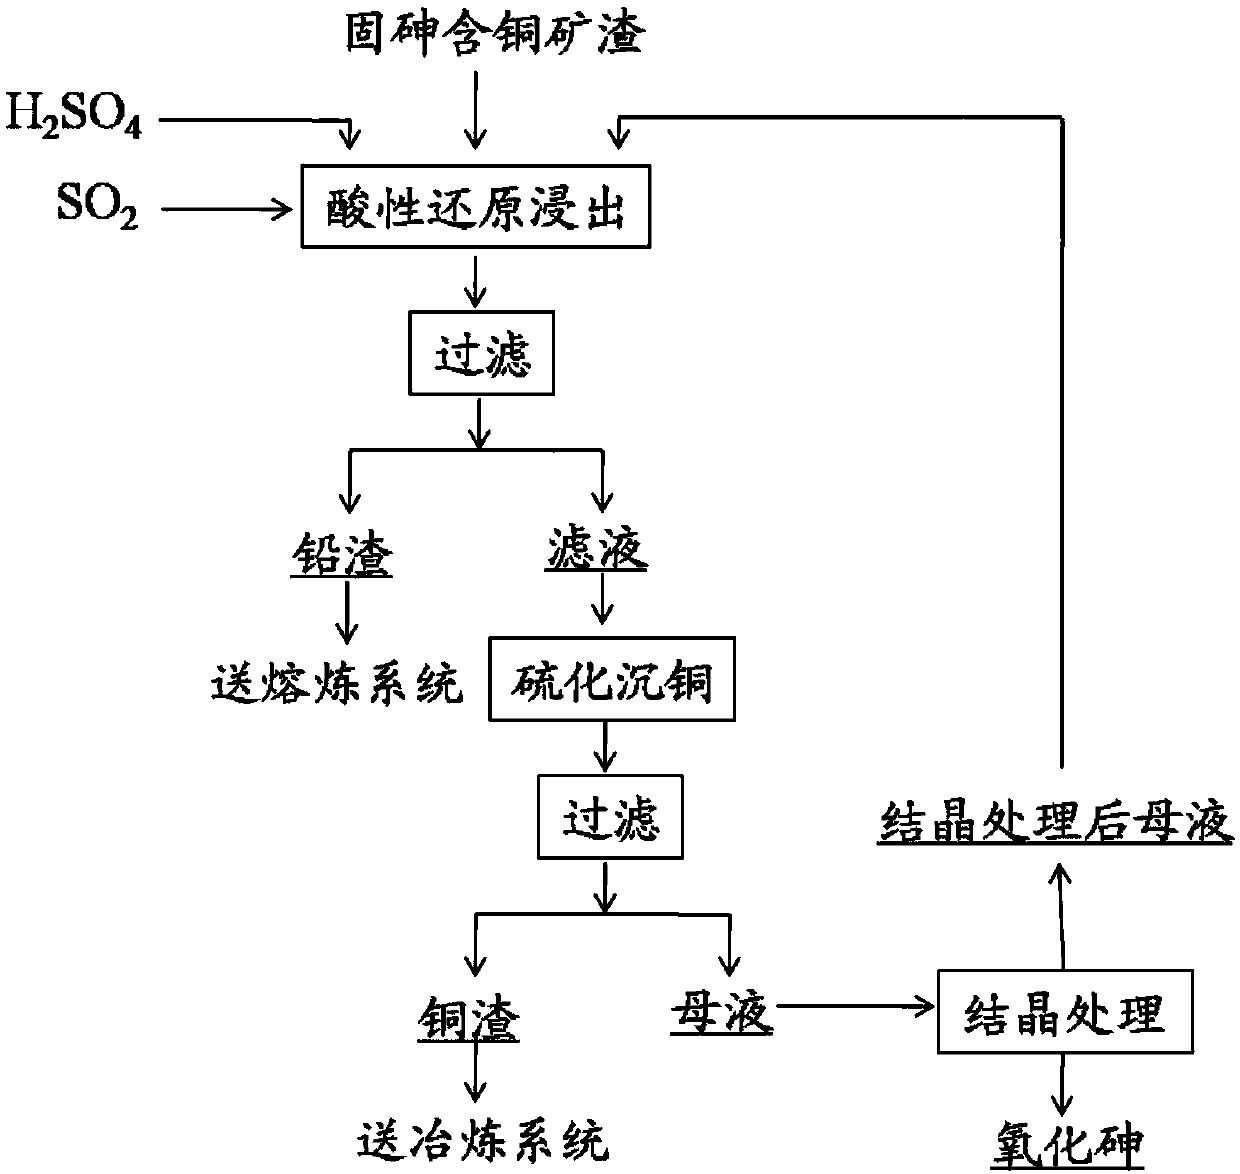 Arsenic removal method for arsenic-fixing copper-containing slag